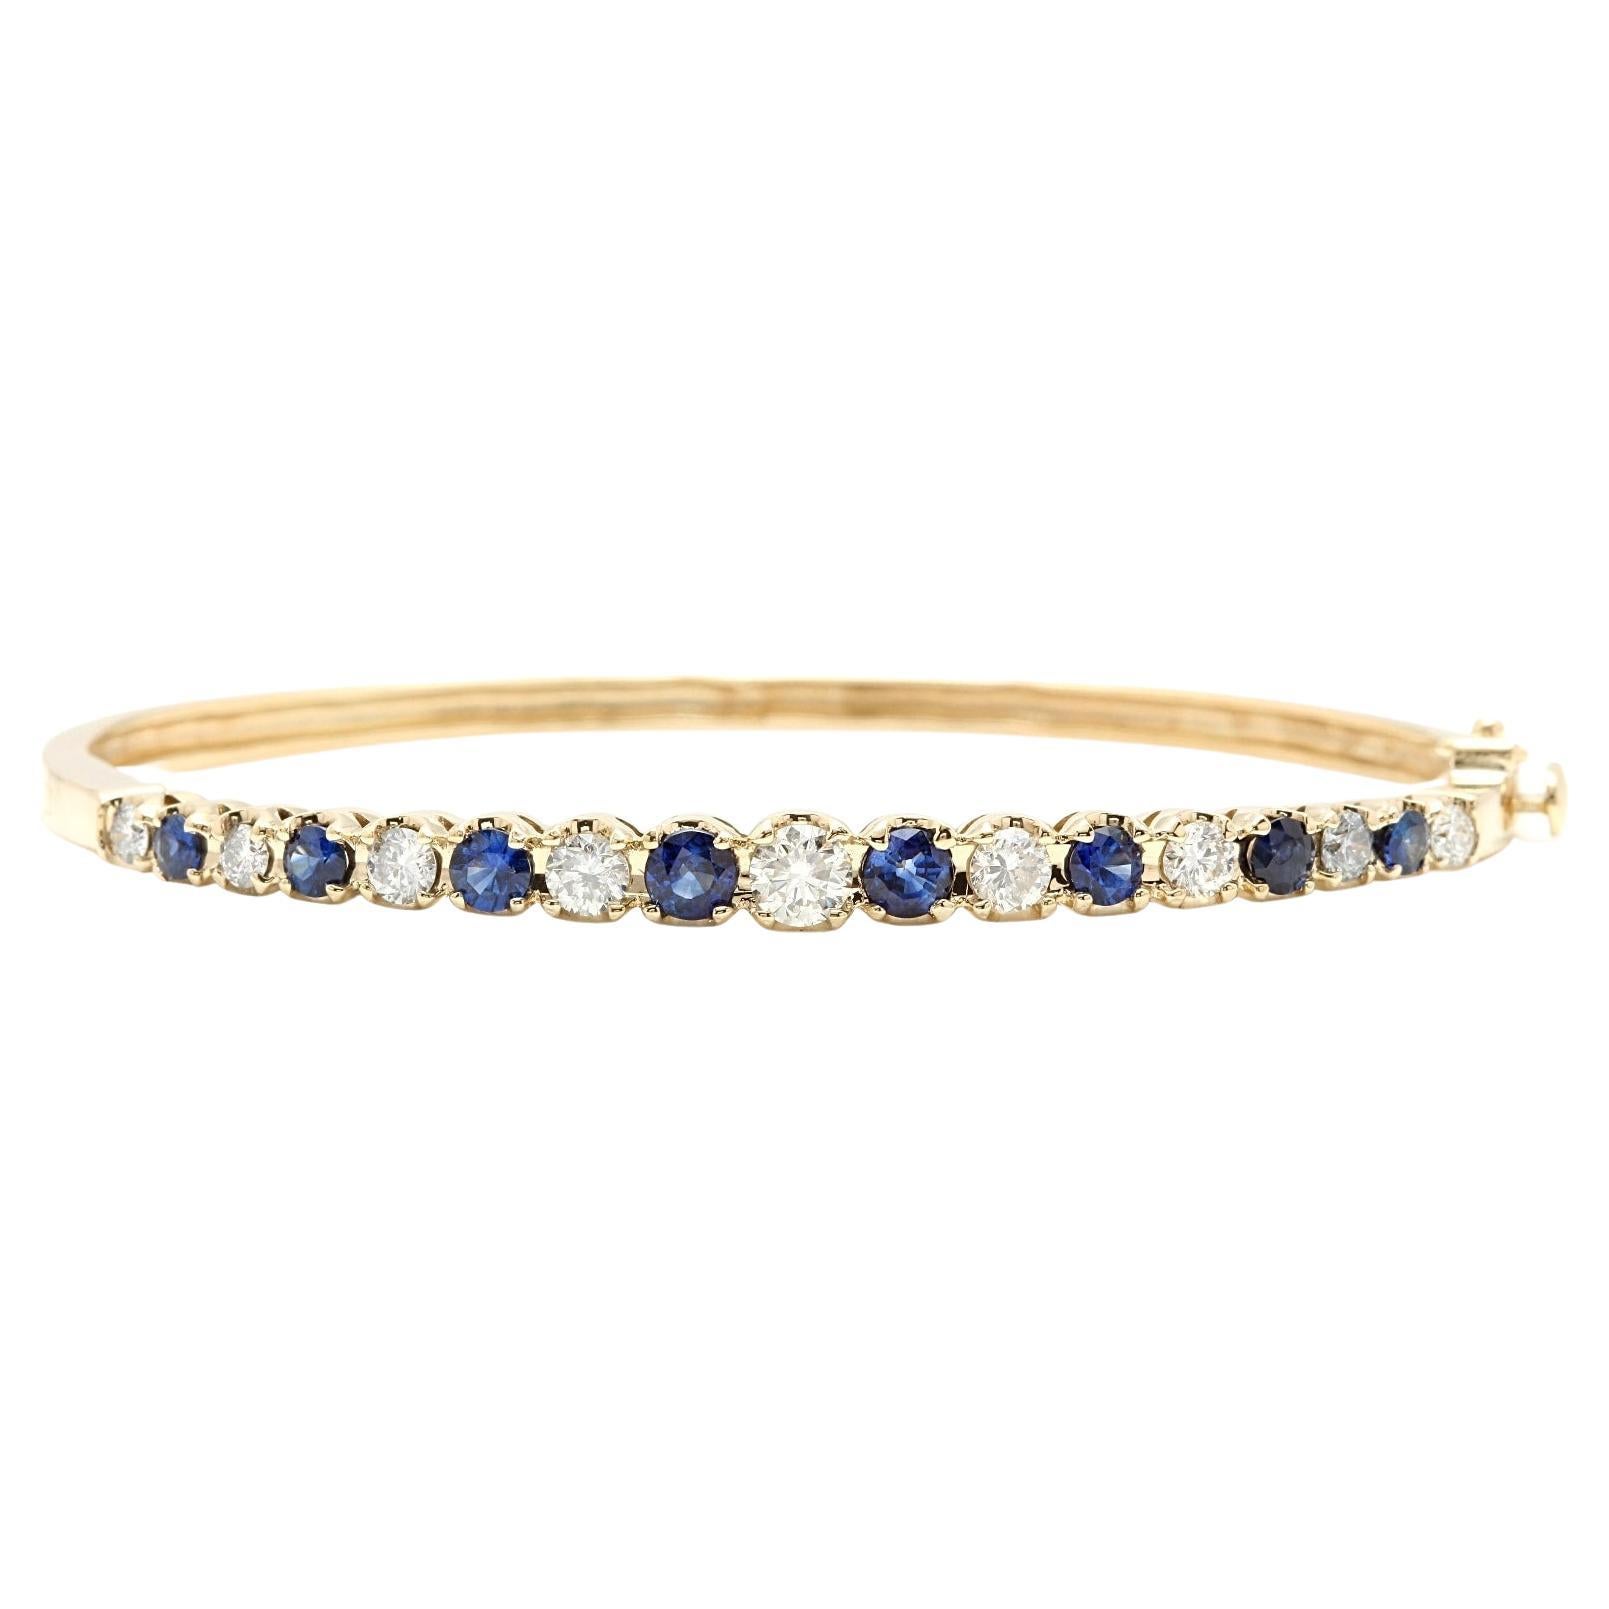 4.00ct Natural Diamond and Sapphire 14k Solid Yellow Gold Bracelet